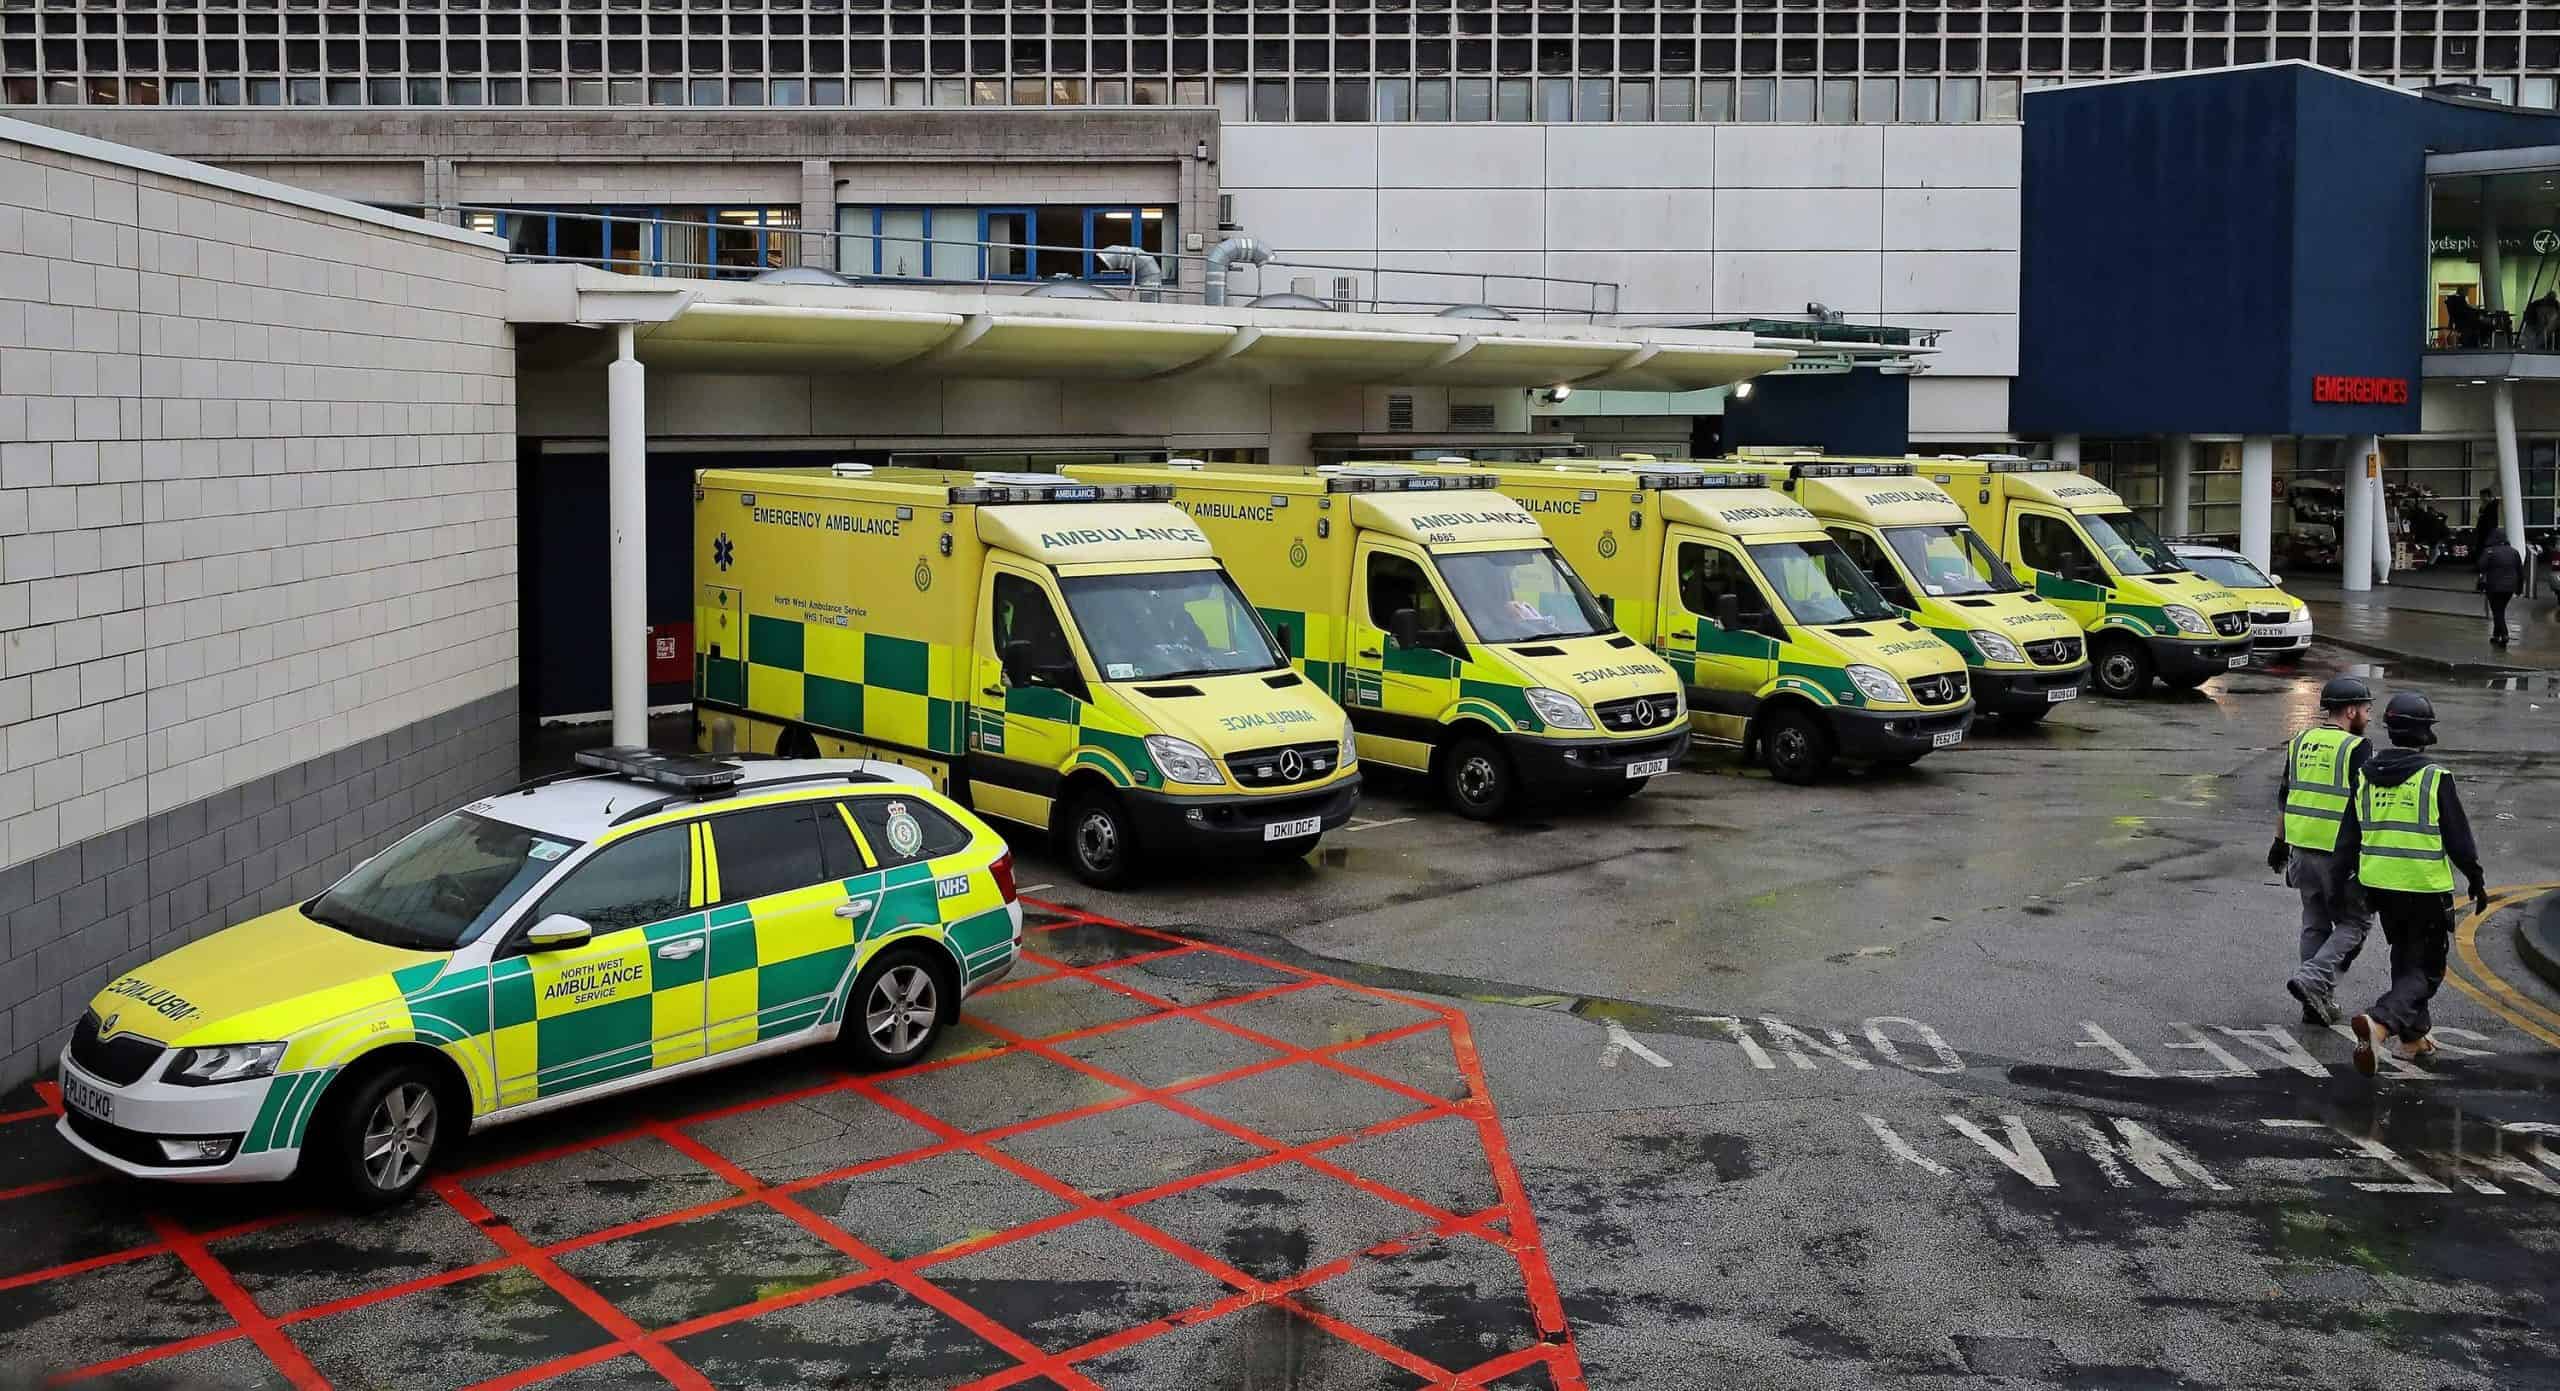 Paramedics ‘quitting in droves’ as ambulance wait time soar to record highs